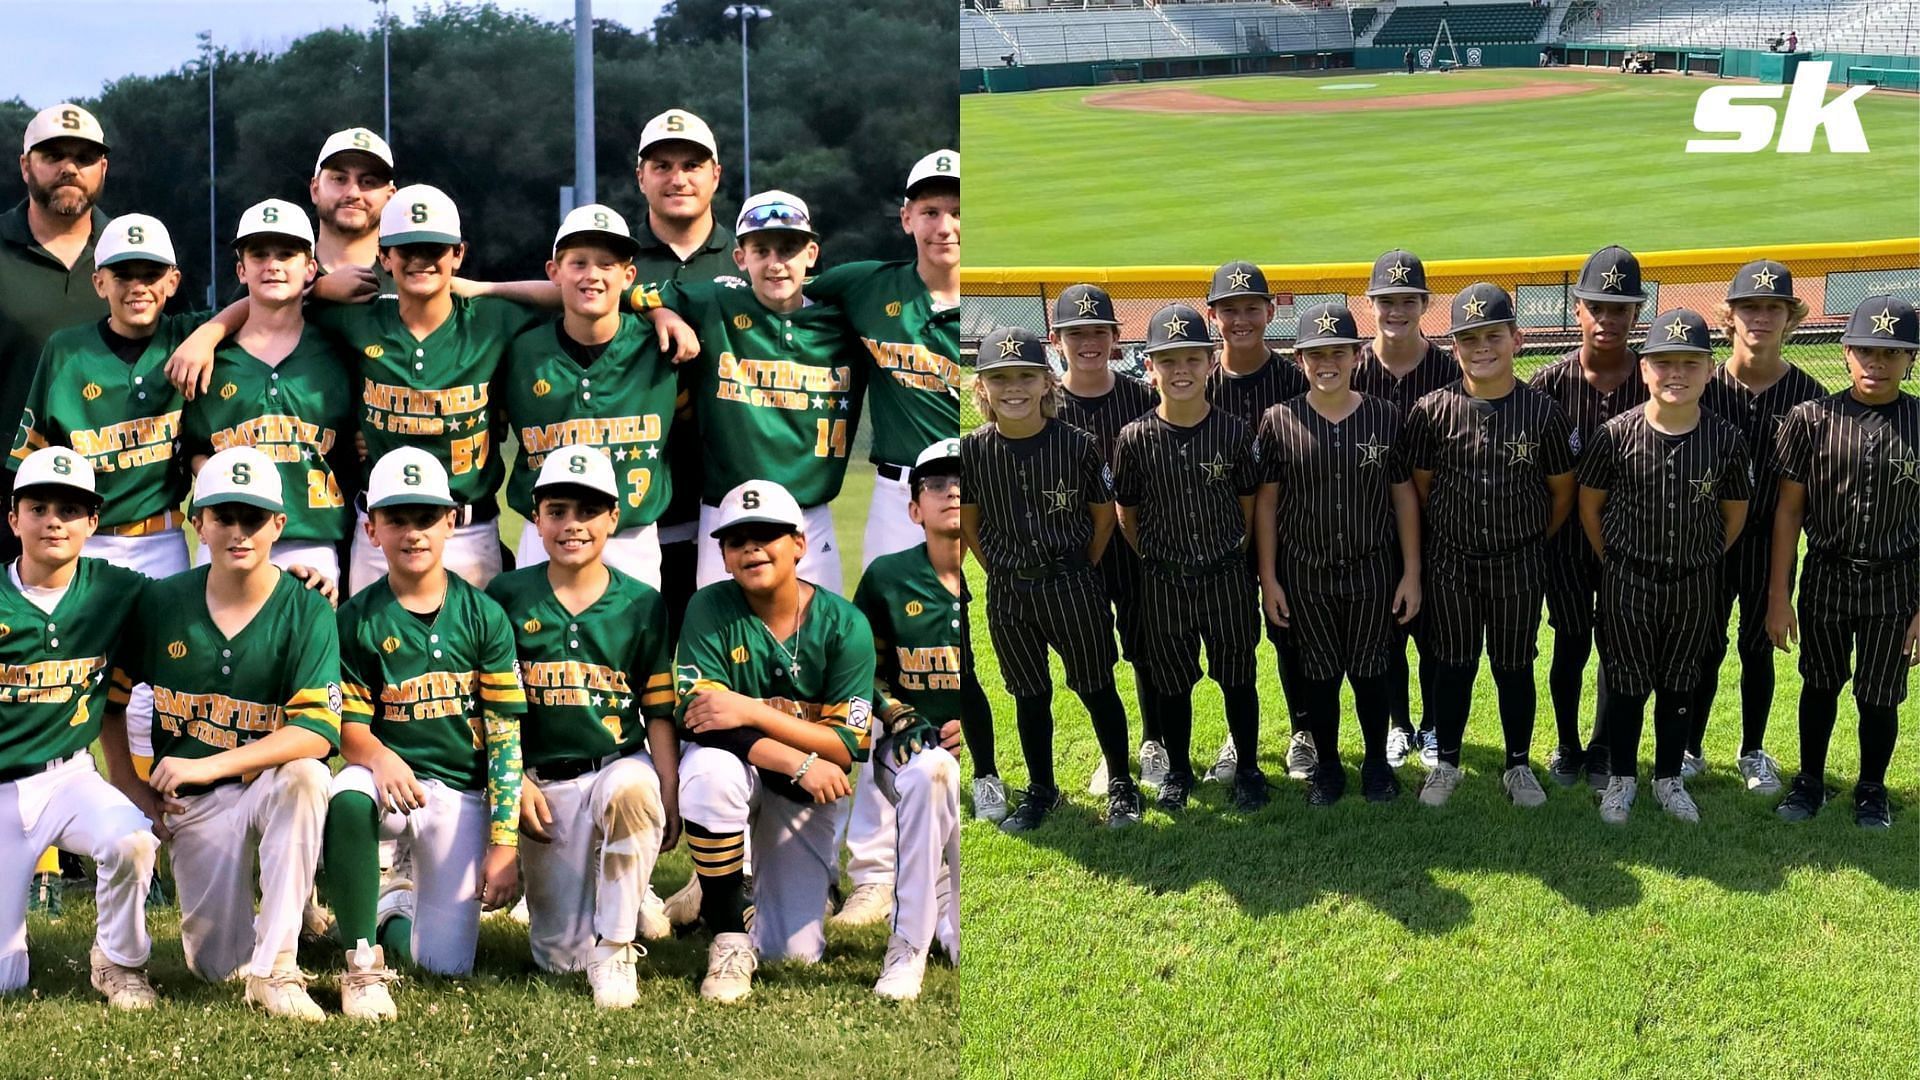 Little League Baseball World Series 2023 schedule Metro Region vs Southeast Little League Baseball World Series 2023 Game 10 Venue, Start time, TV and streaming details